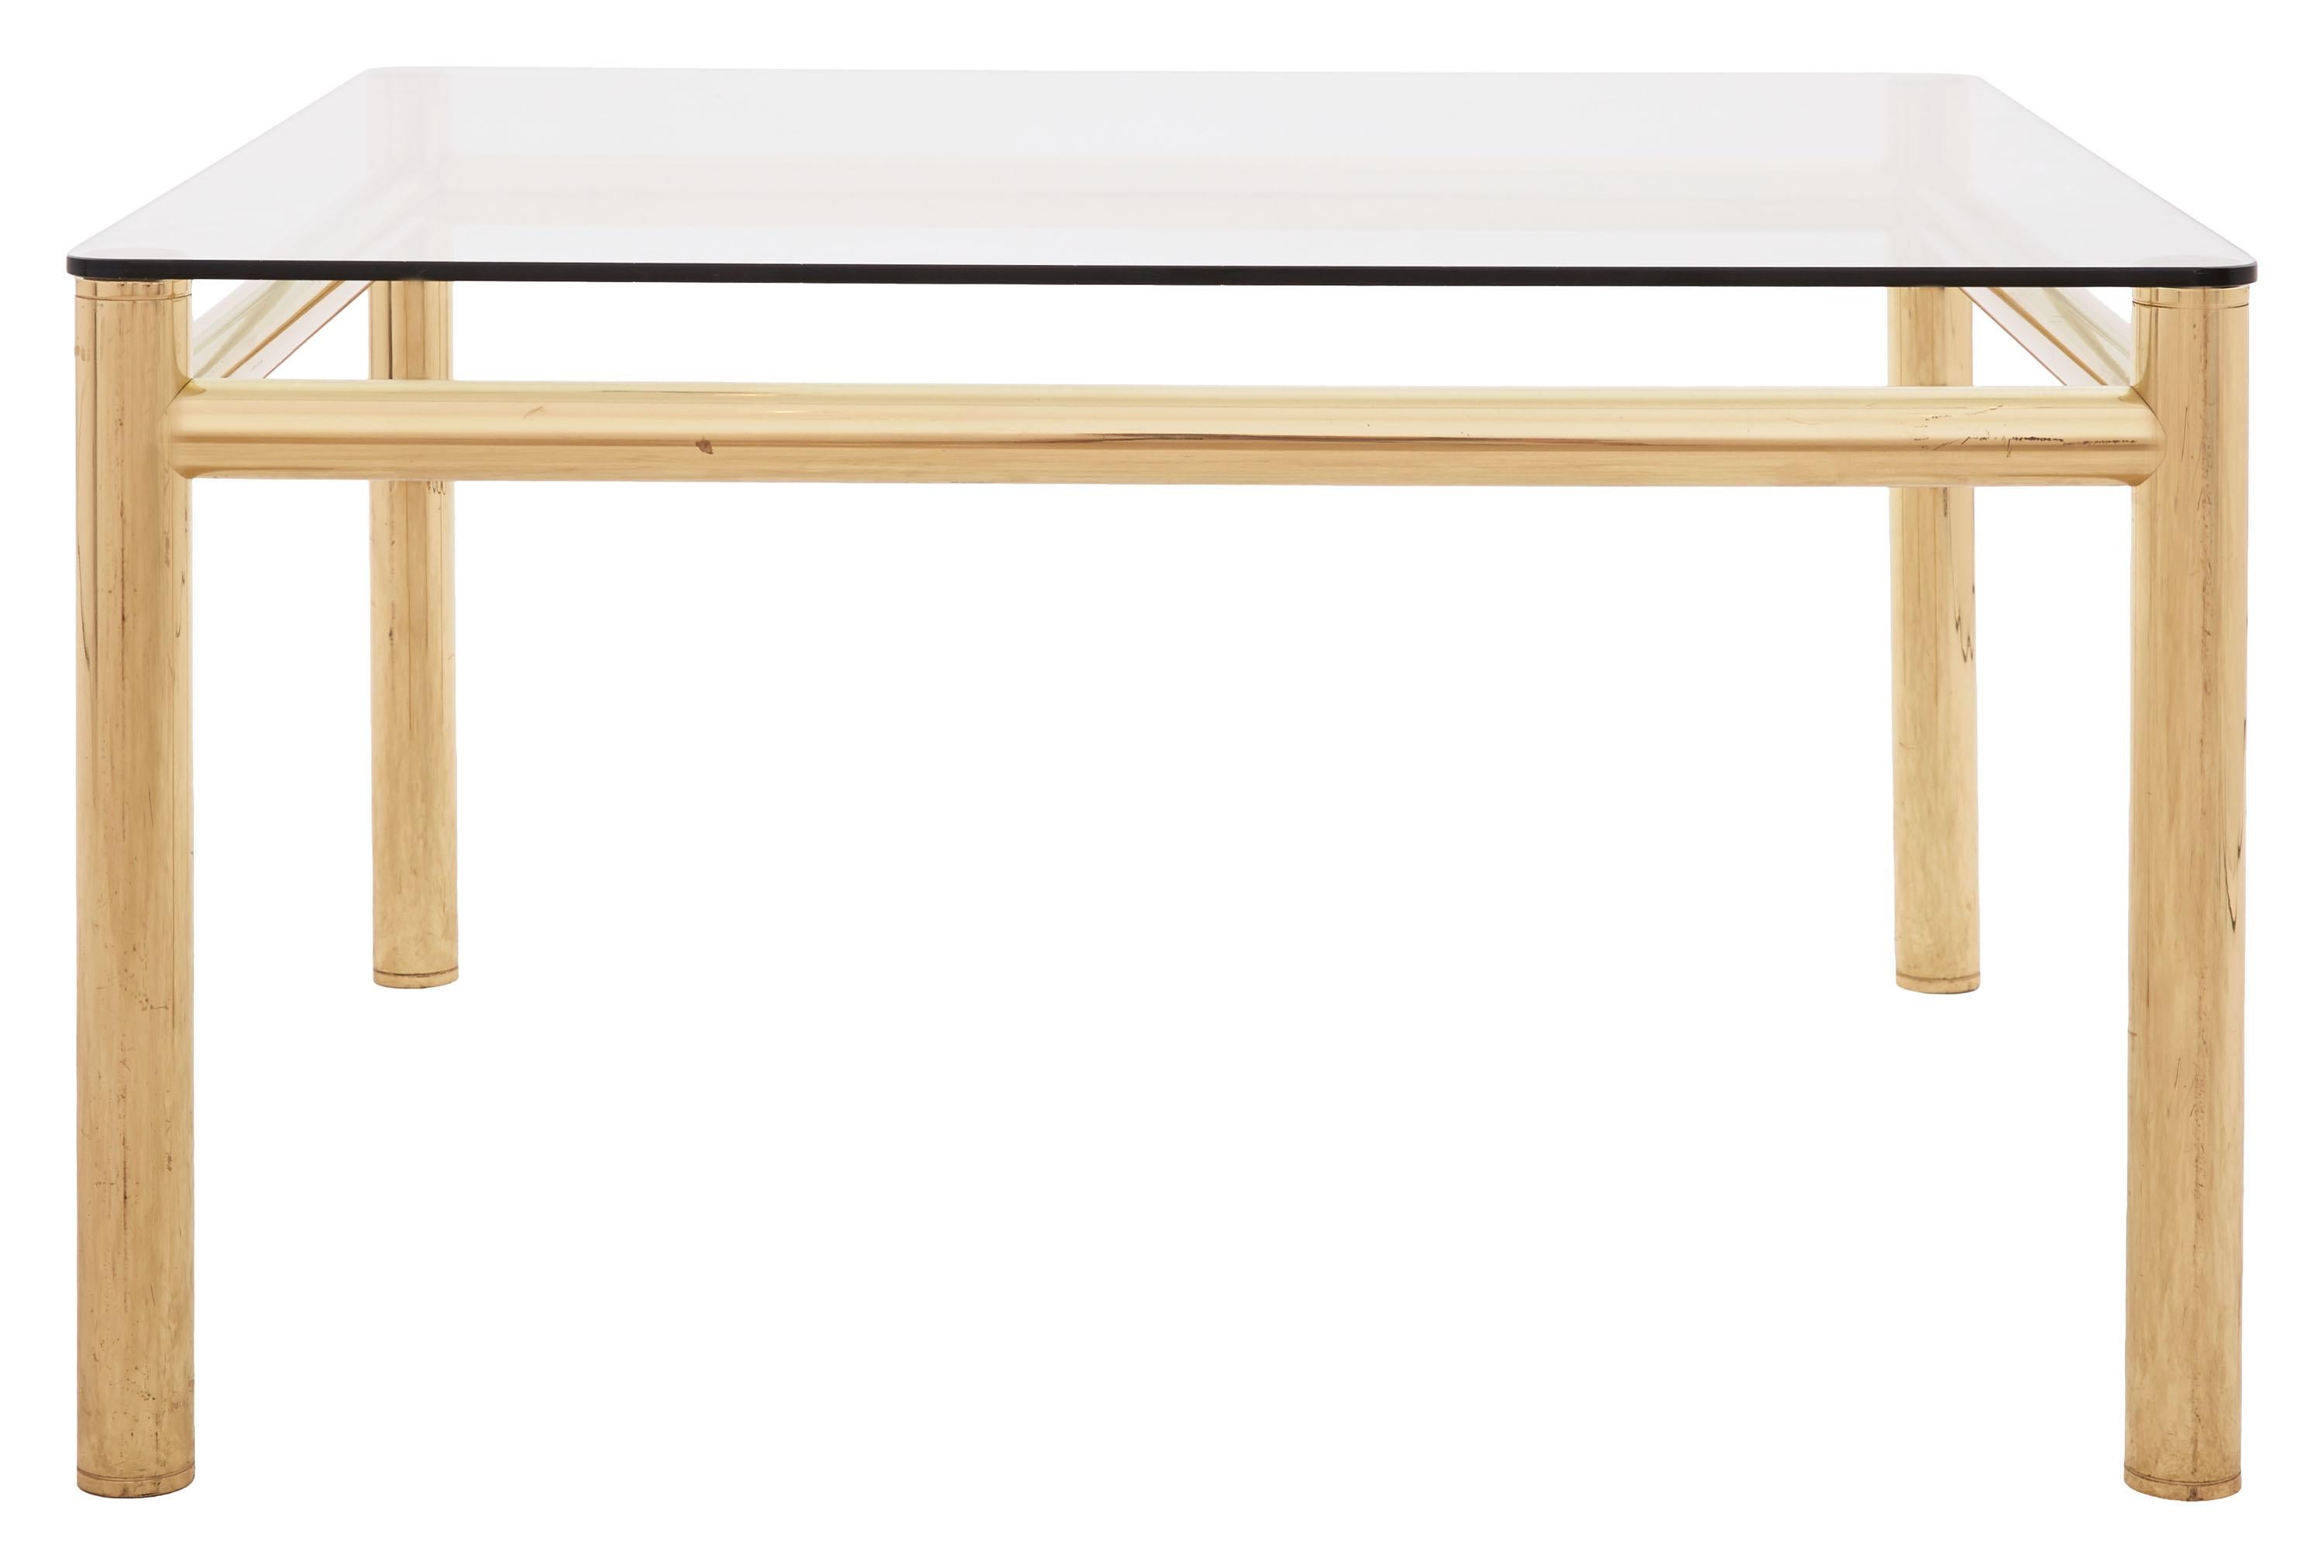 French Midcentury Square Brass Dining Table with Leather Pad Detail For Sale